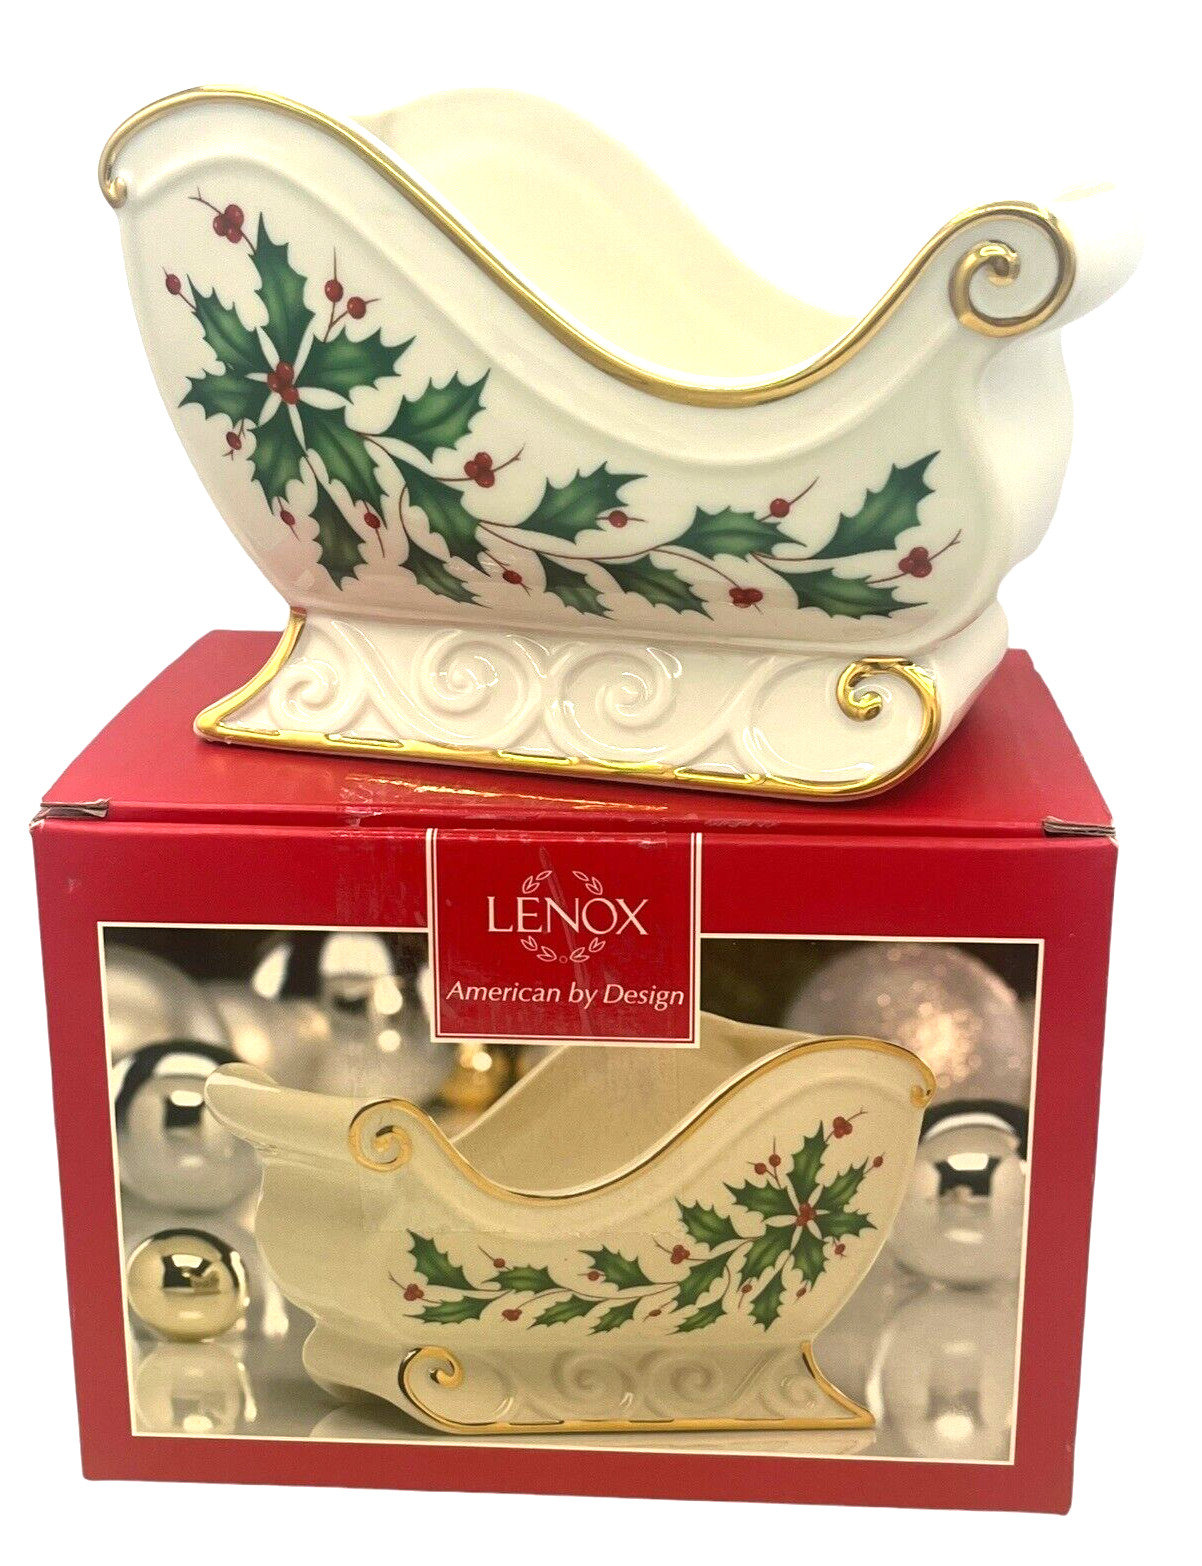 Lenox Holiday Sleigh Candy Dish Holiday Archive American by Design